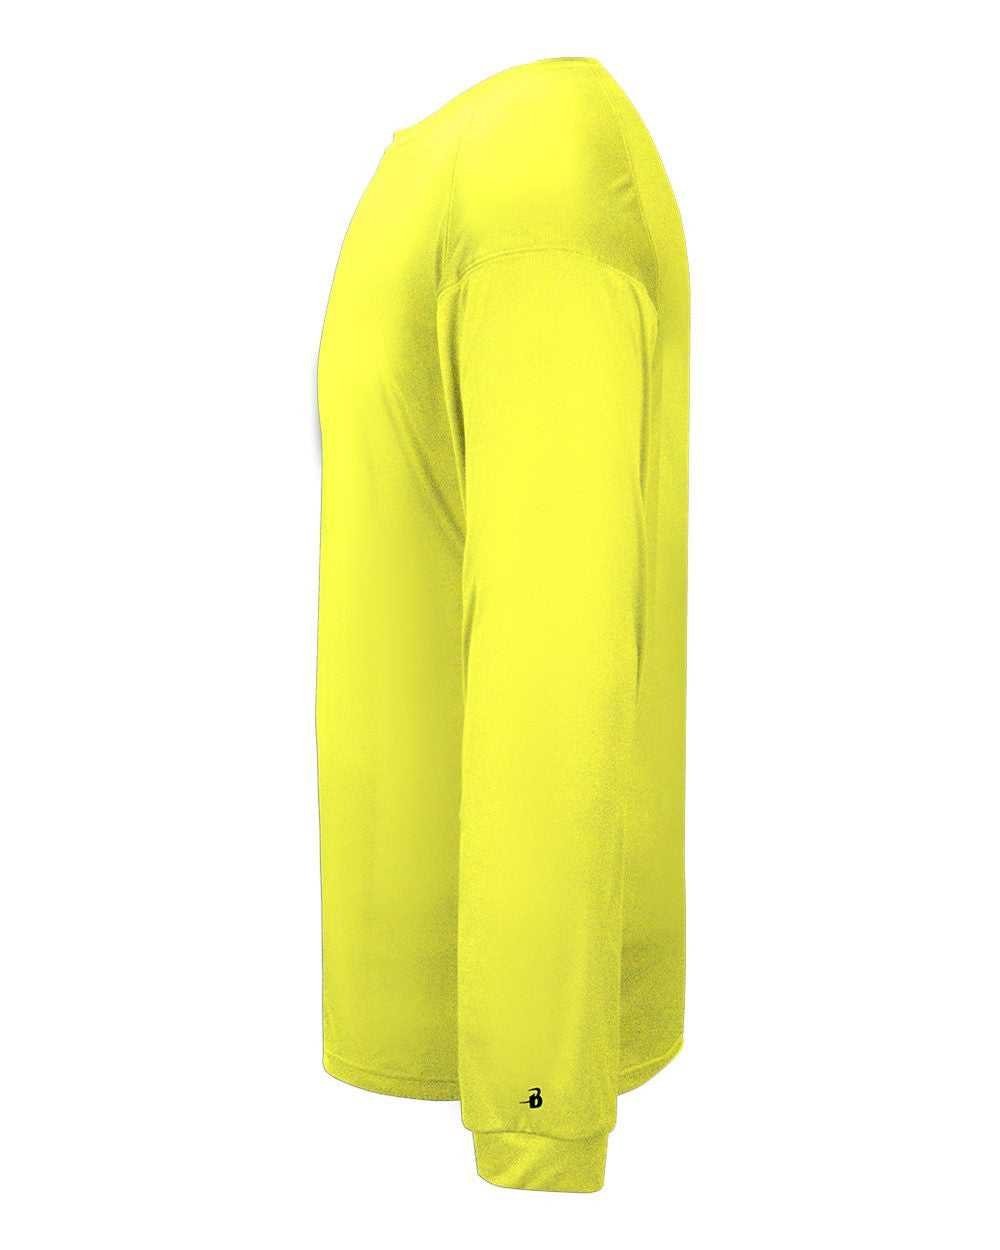 Badger Sport 4004 Ultimate Softlock Long Sleeve Tee - Safety Yellow - HIT a Double - 1